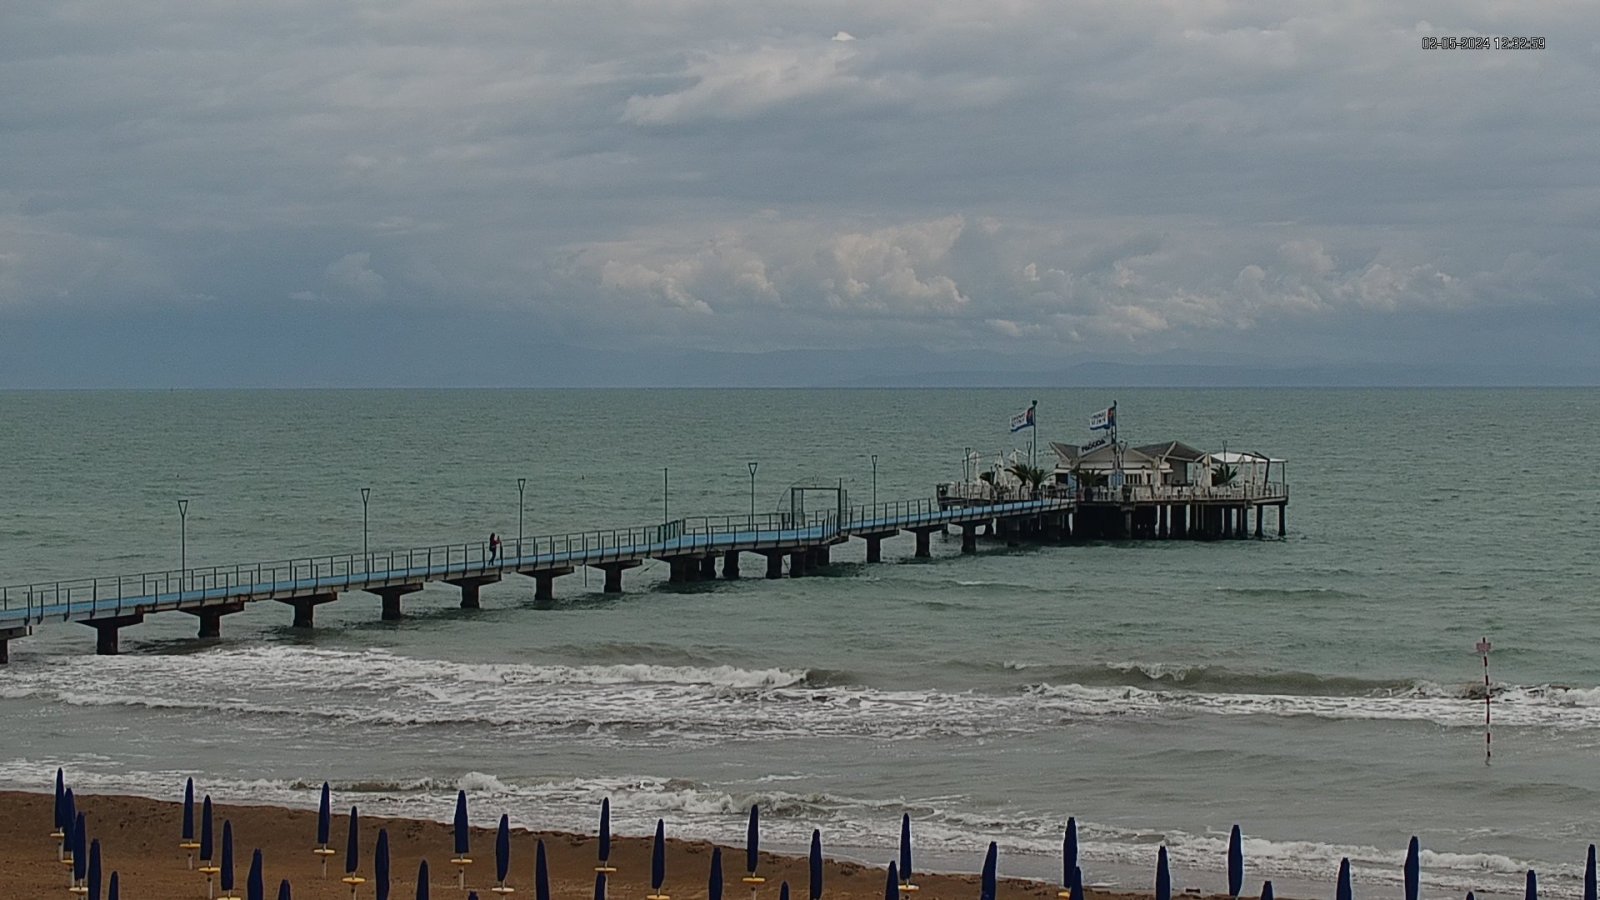 Webcam image with a zoom view of the Pier and Pagoda